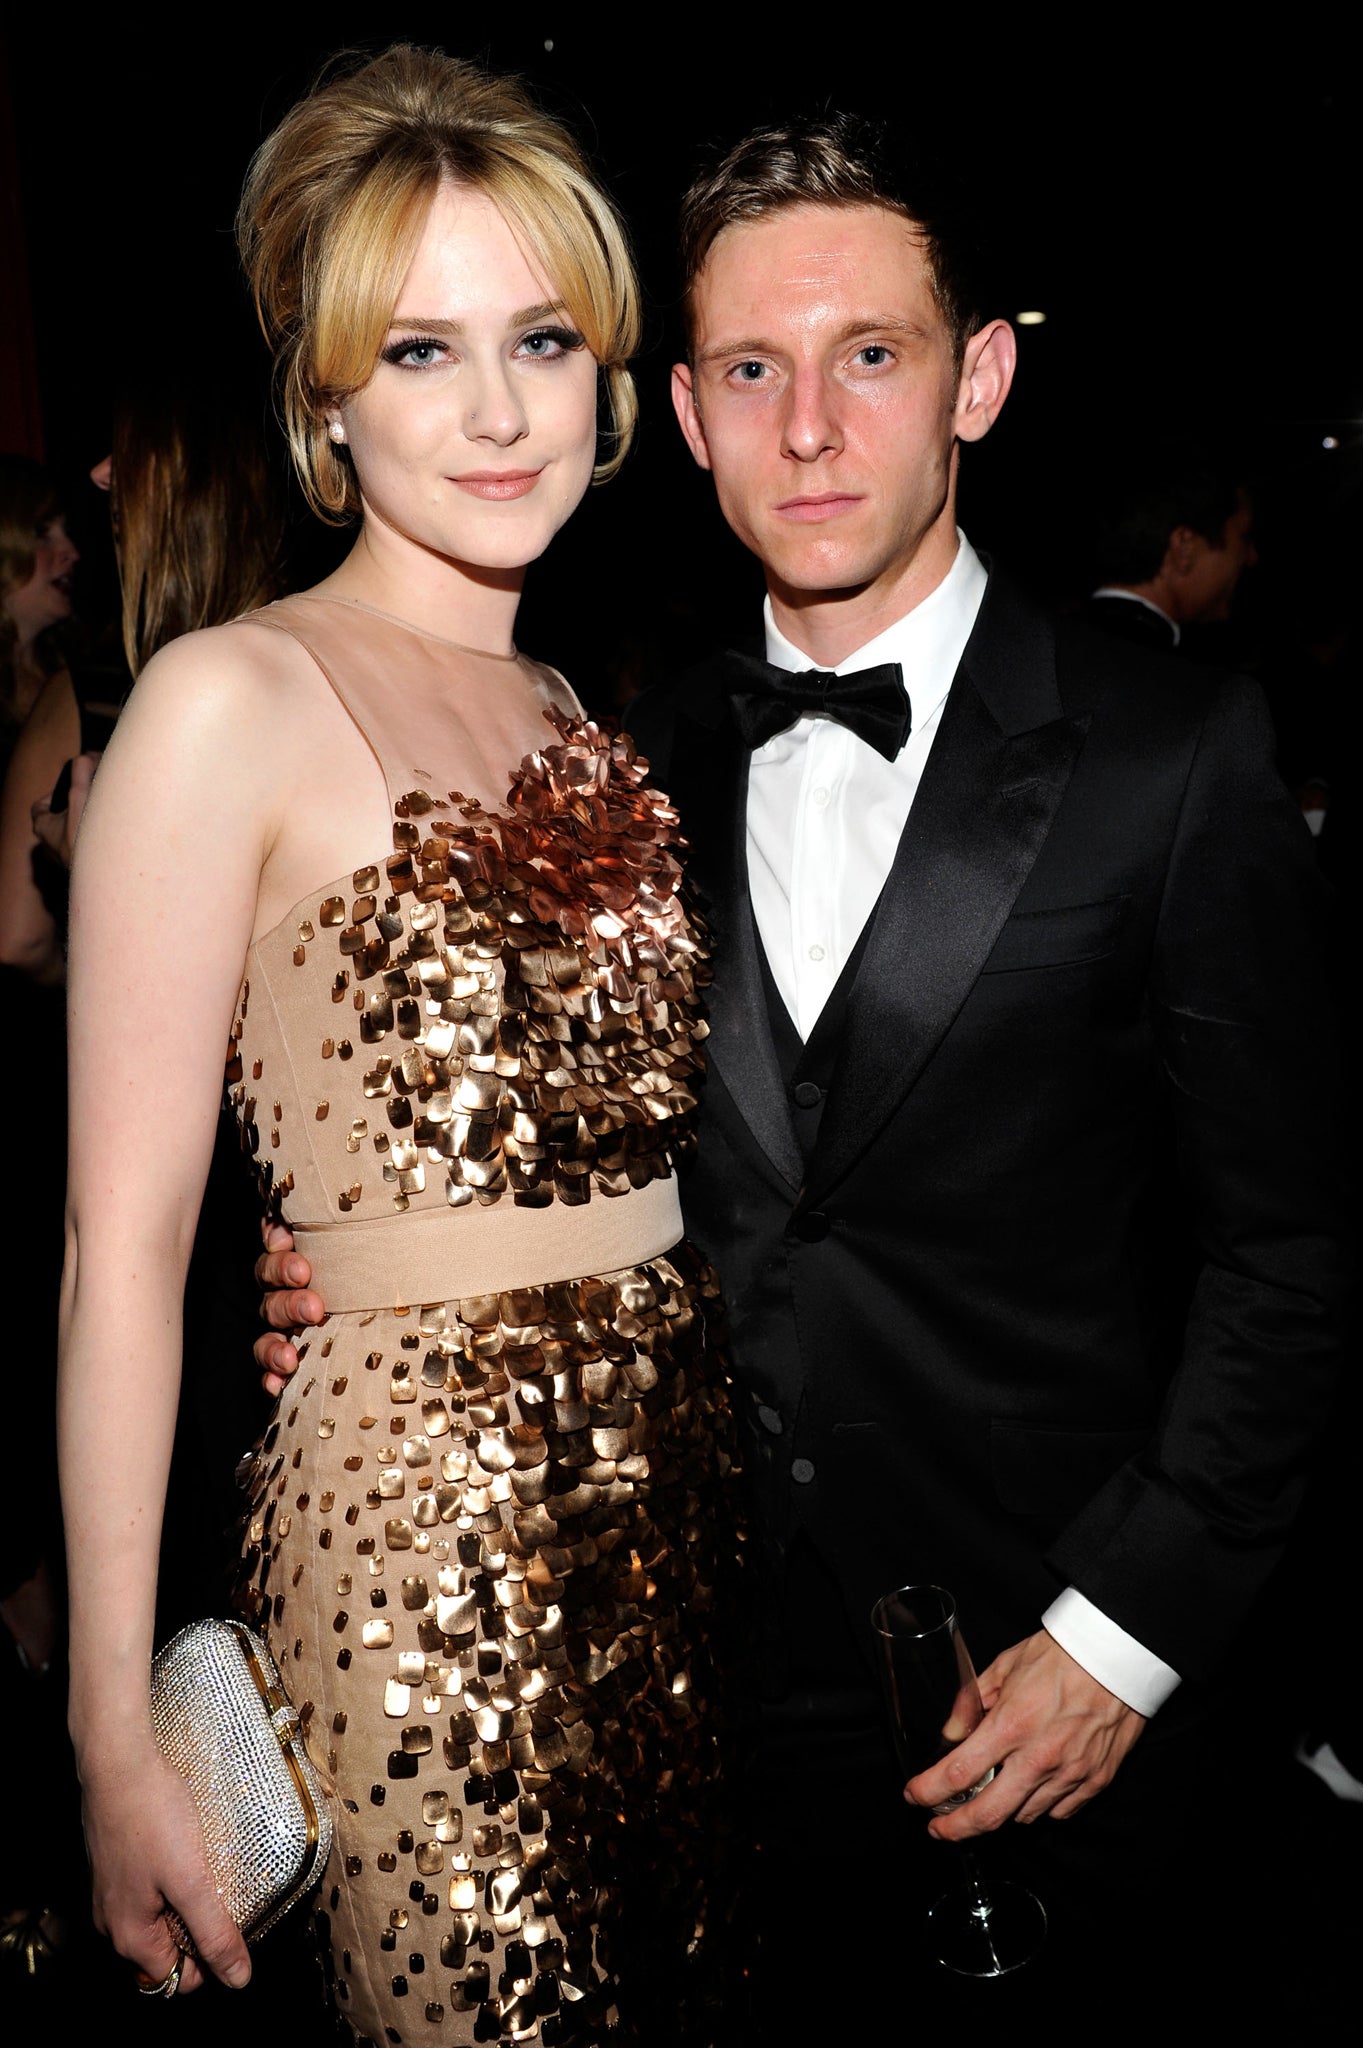 Actors Evan Rachel Wood and Jamie Bell who have announced the birth of their first child.